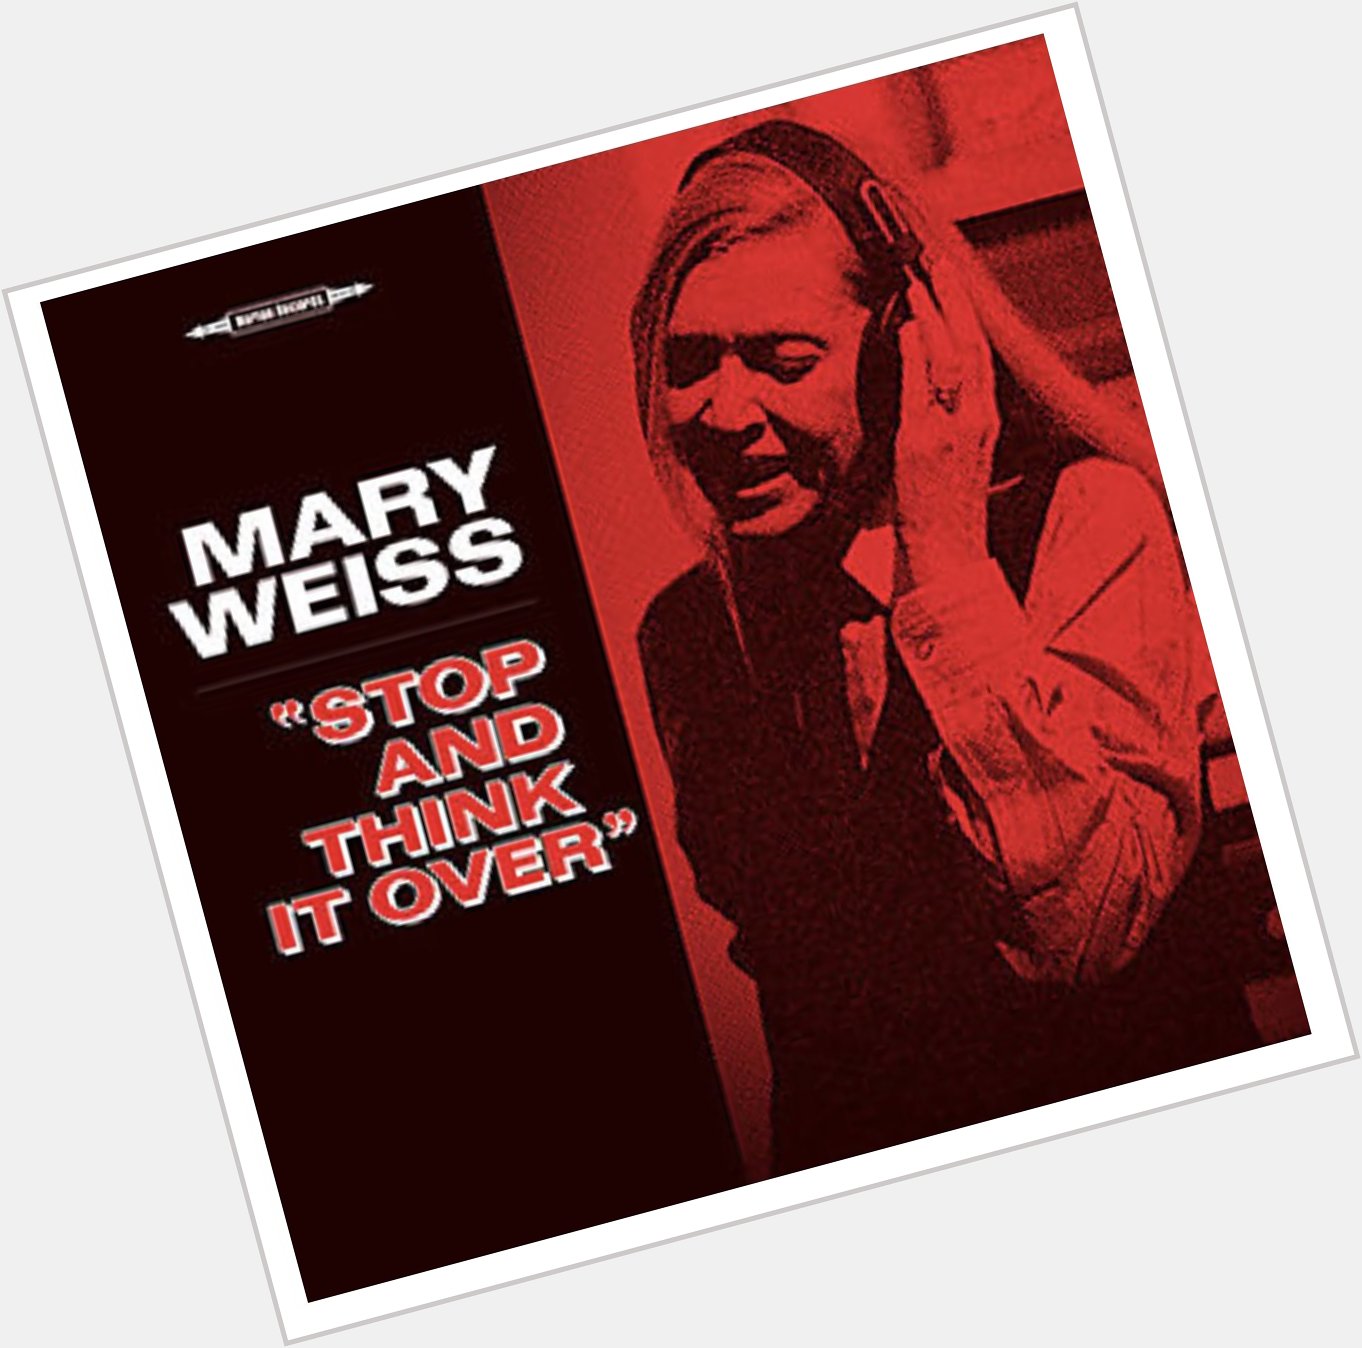 Happy birthday to Mary Weiss! Leader of the (girl group) Pack   (see more:  